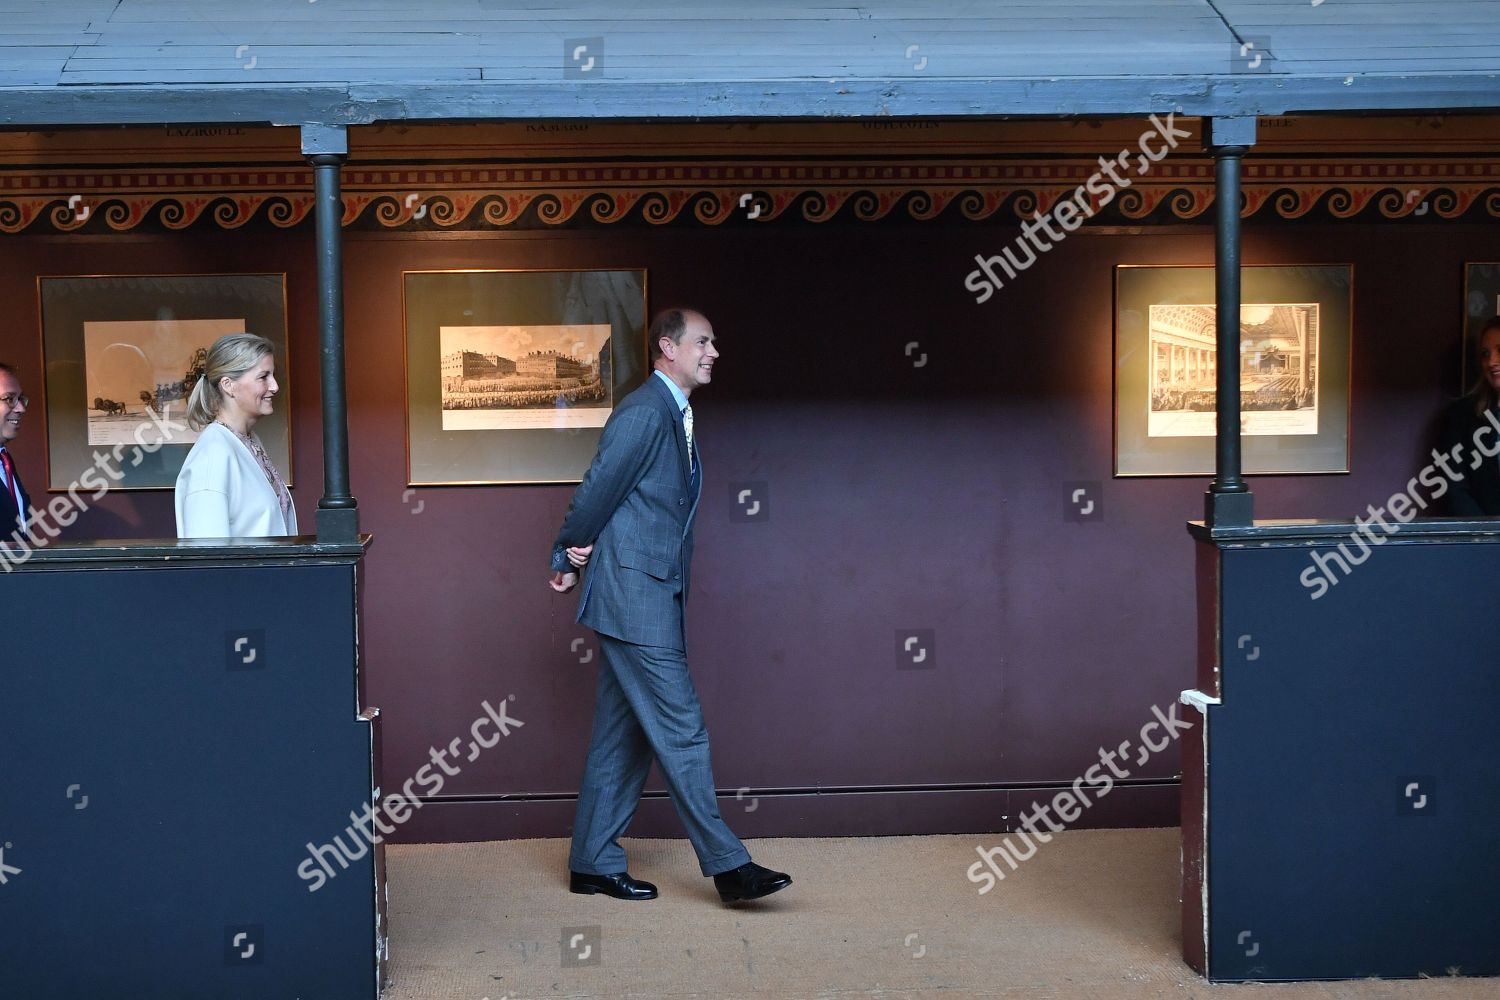 prince-edward-and-sophie-countess-of-wessex-visit-to-paris-france-shutterstock-editorial-9907868c.jpg